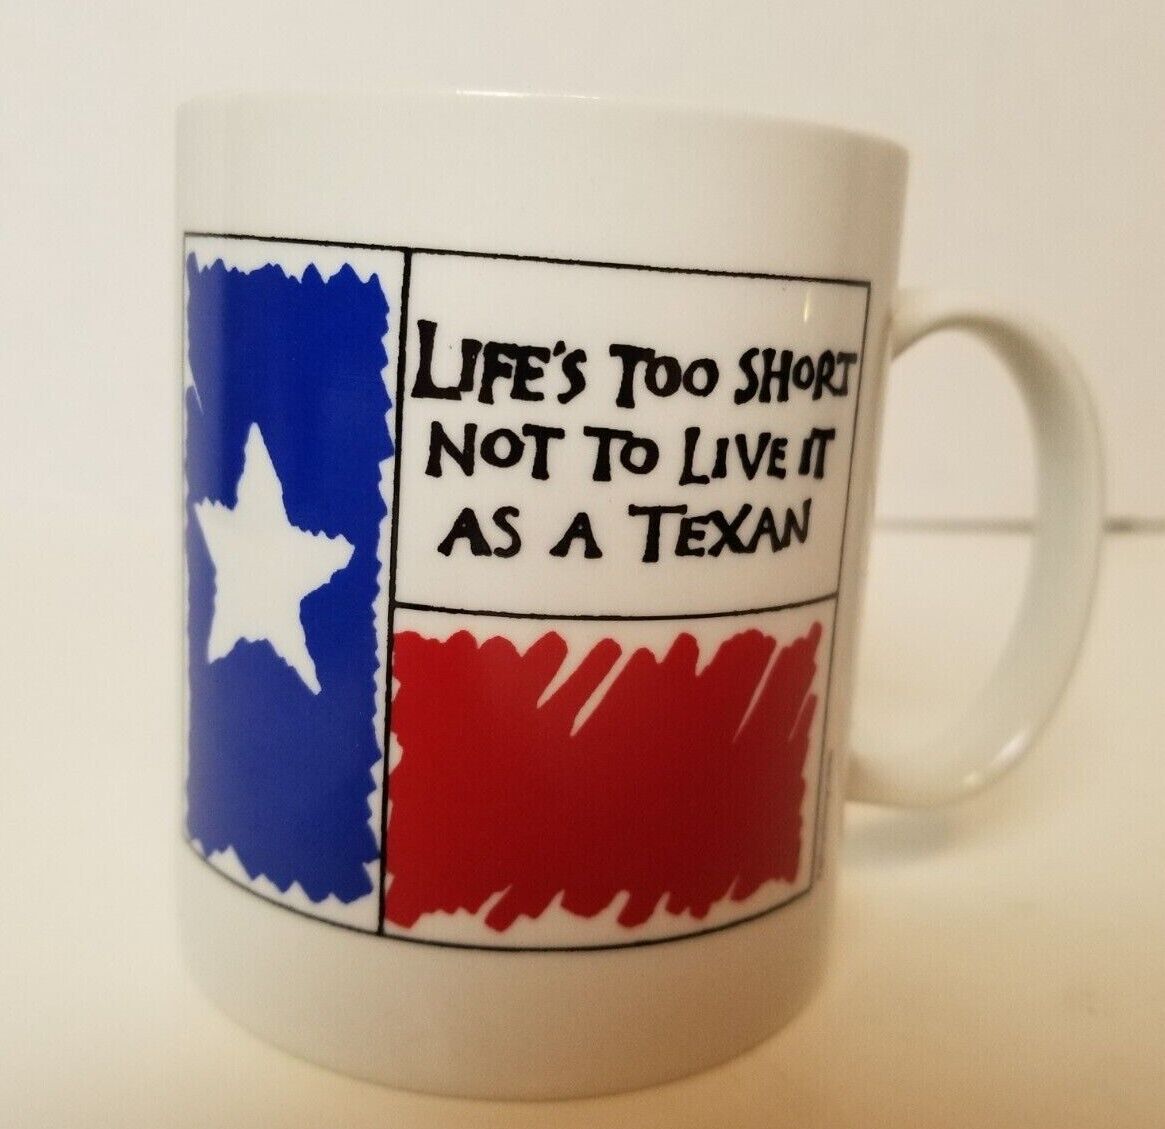 Life’s Too Short Not To Live It As A Texan Ceramic Coffee Mug 